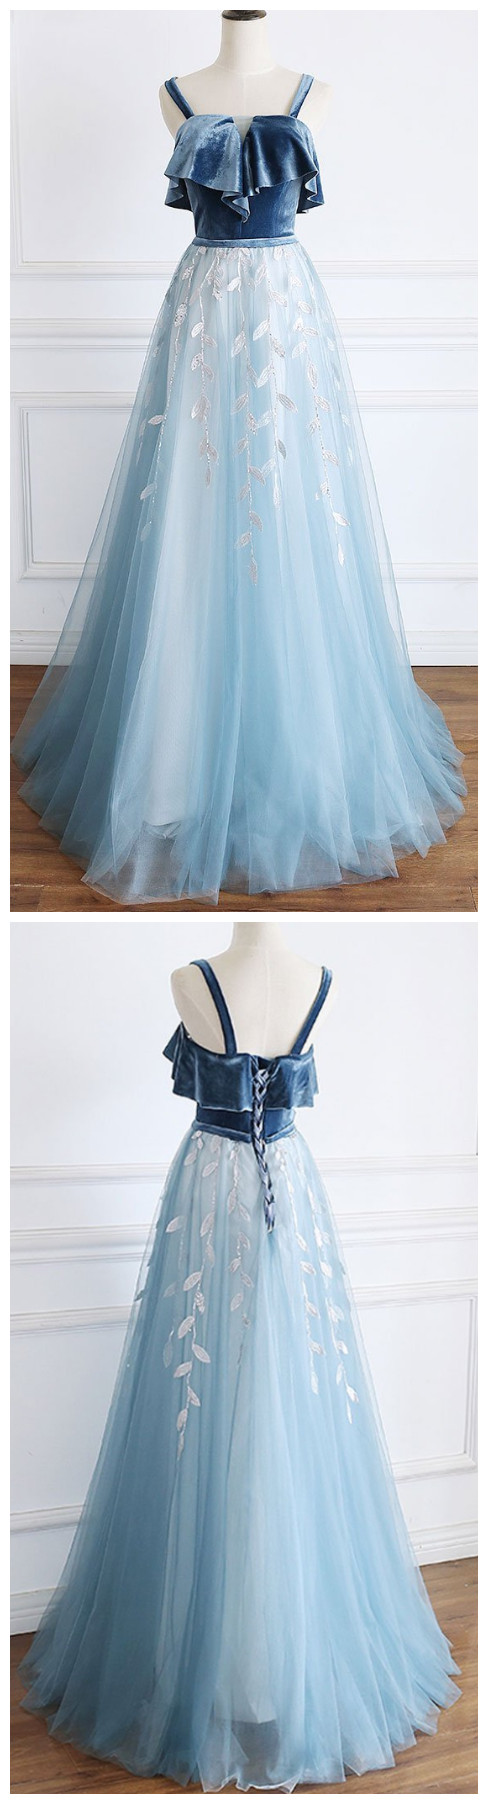 Tulle Lace Long Prom Dress, Blue Lace Formal Dress,evening Dress